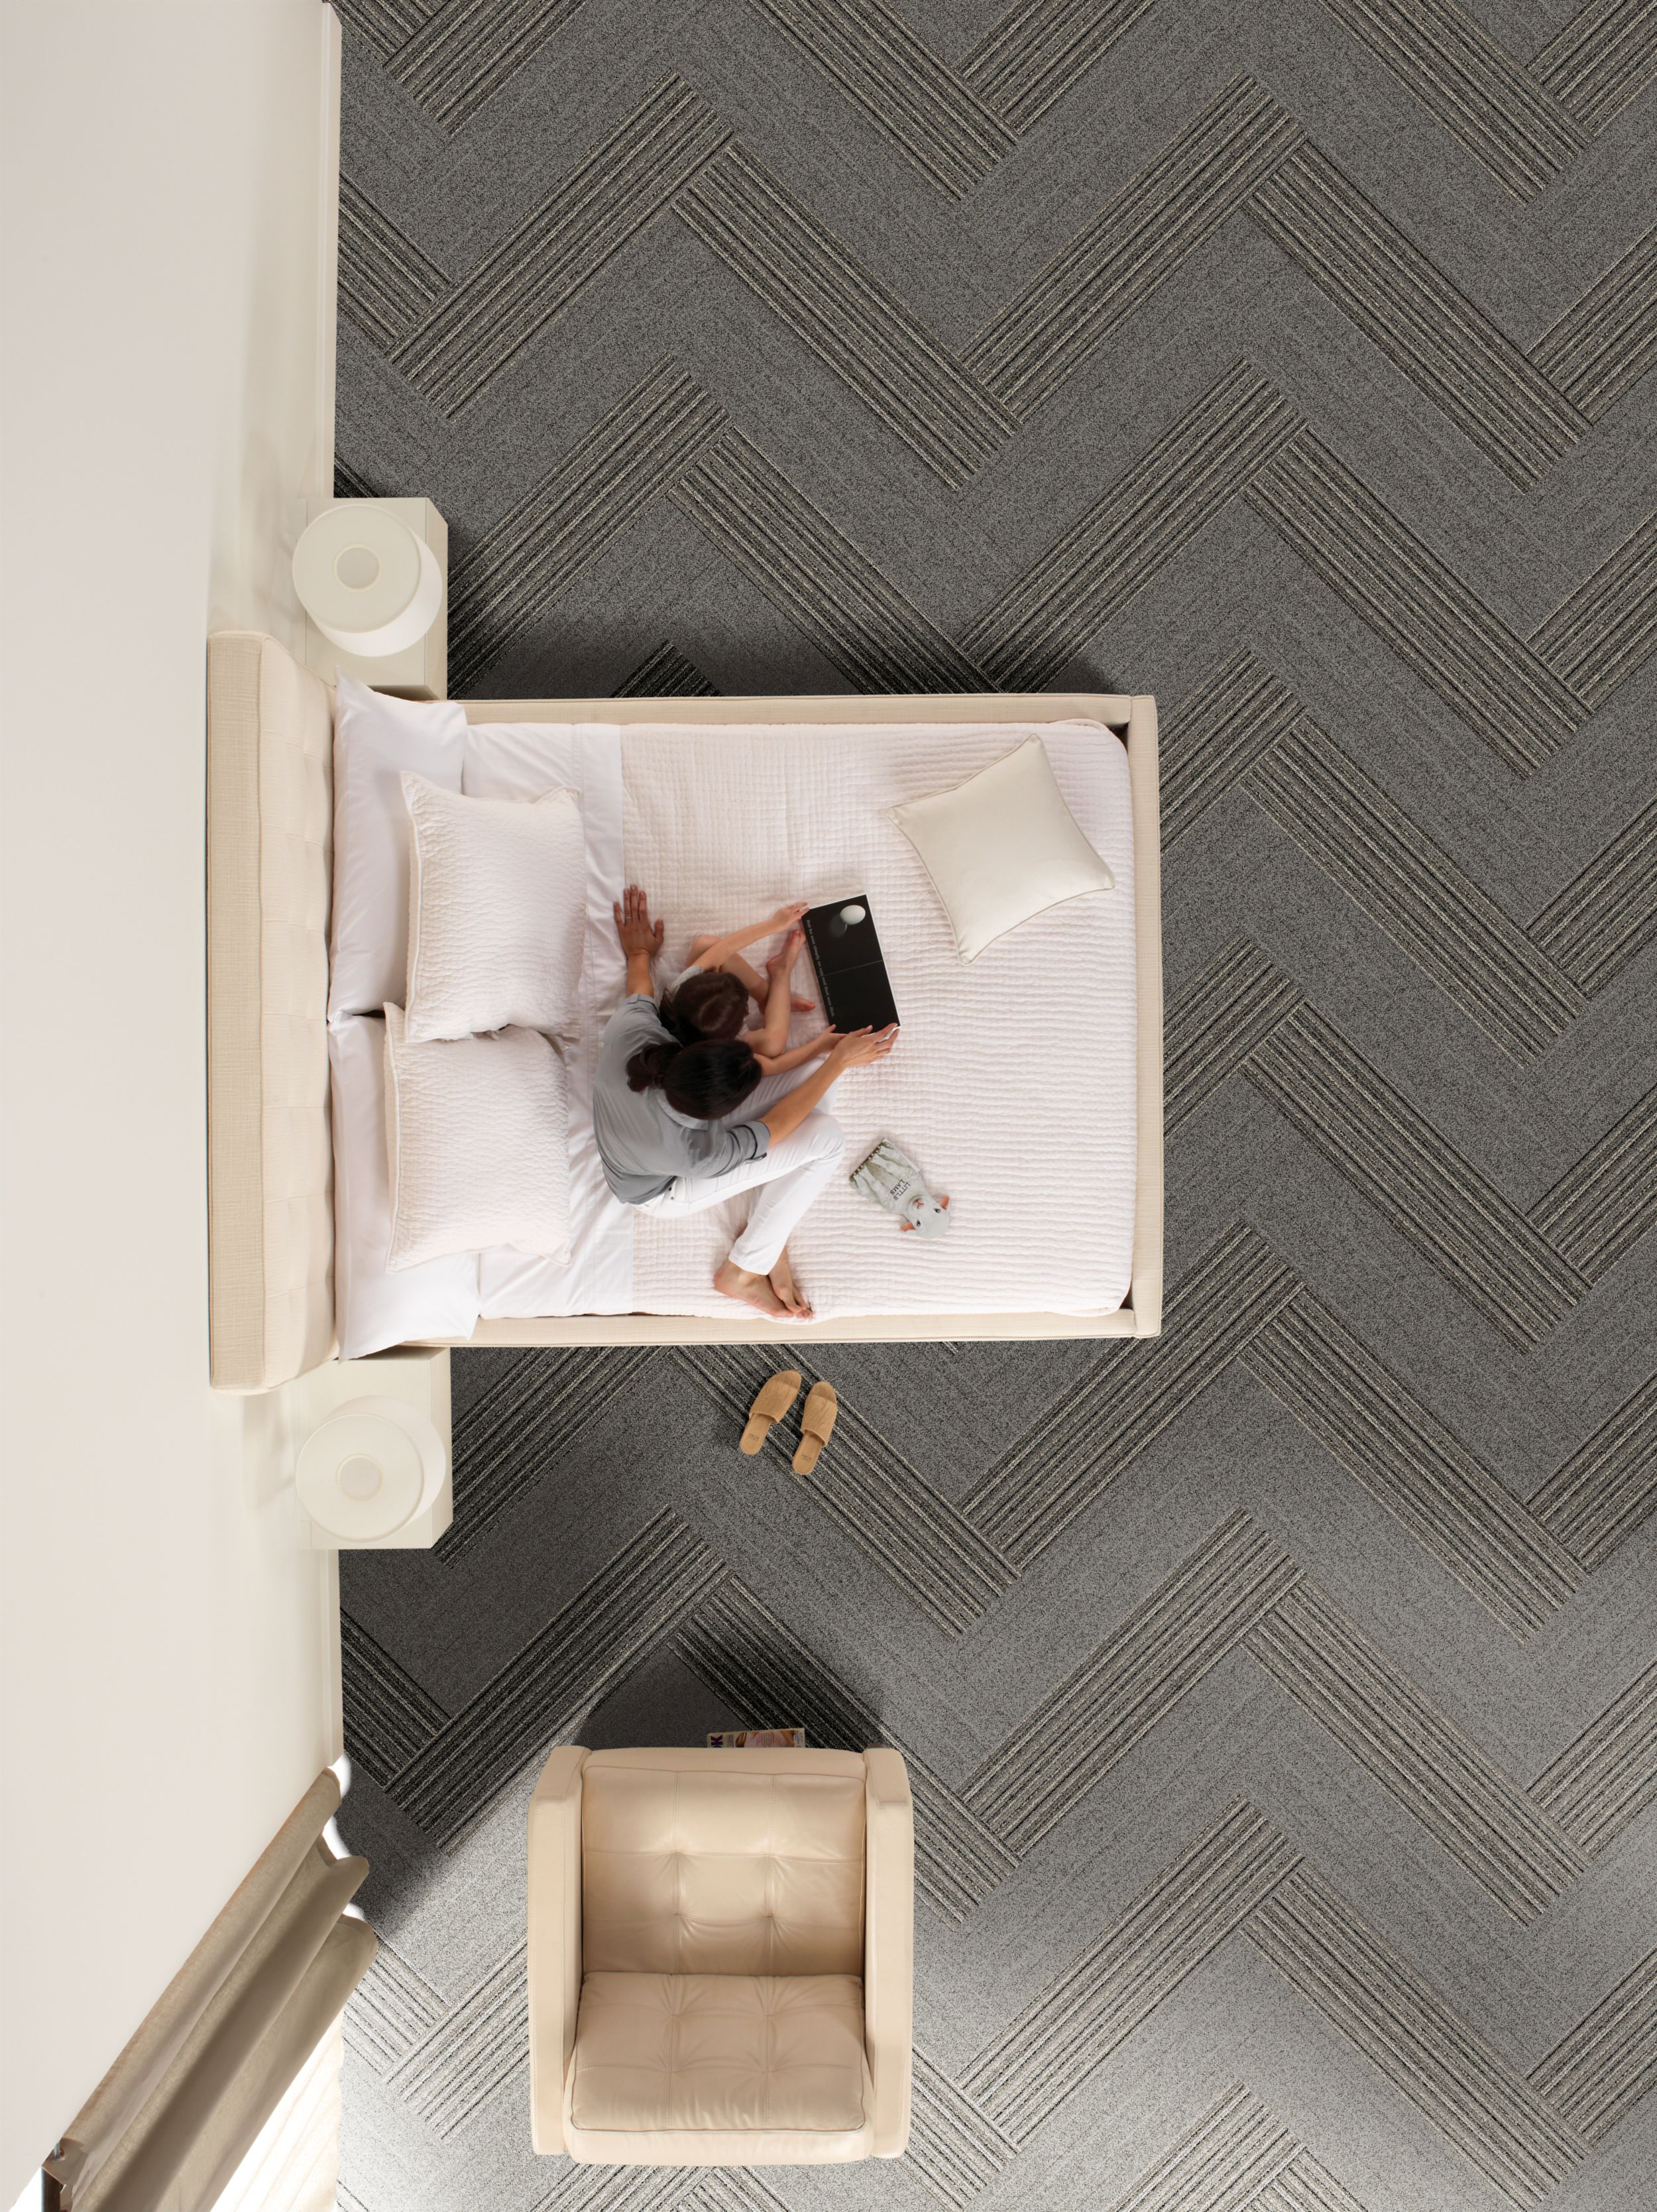 Interface WW860 and WW865 plank carpet tile in hotel guest room with woman and child on bed número de imagen 10